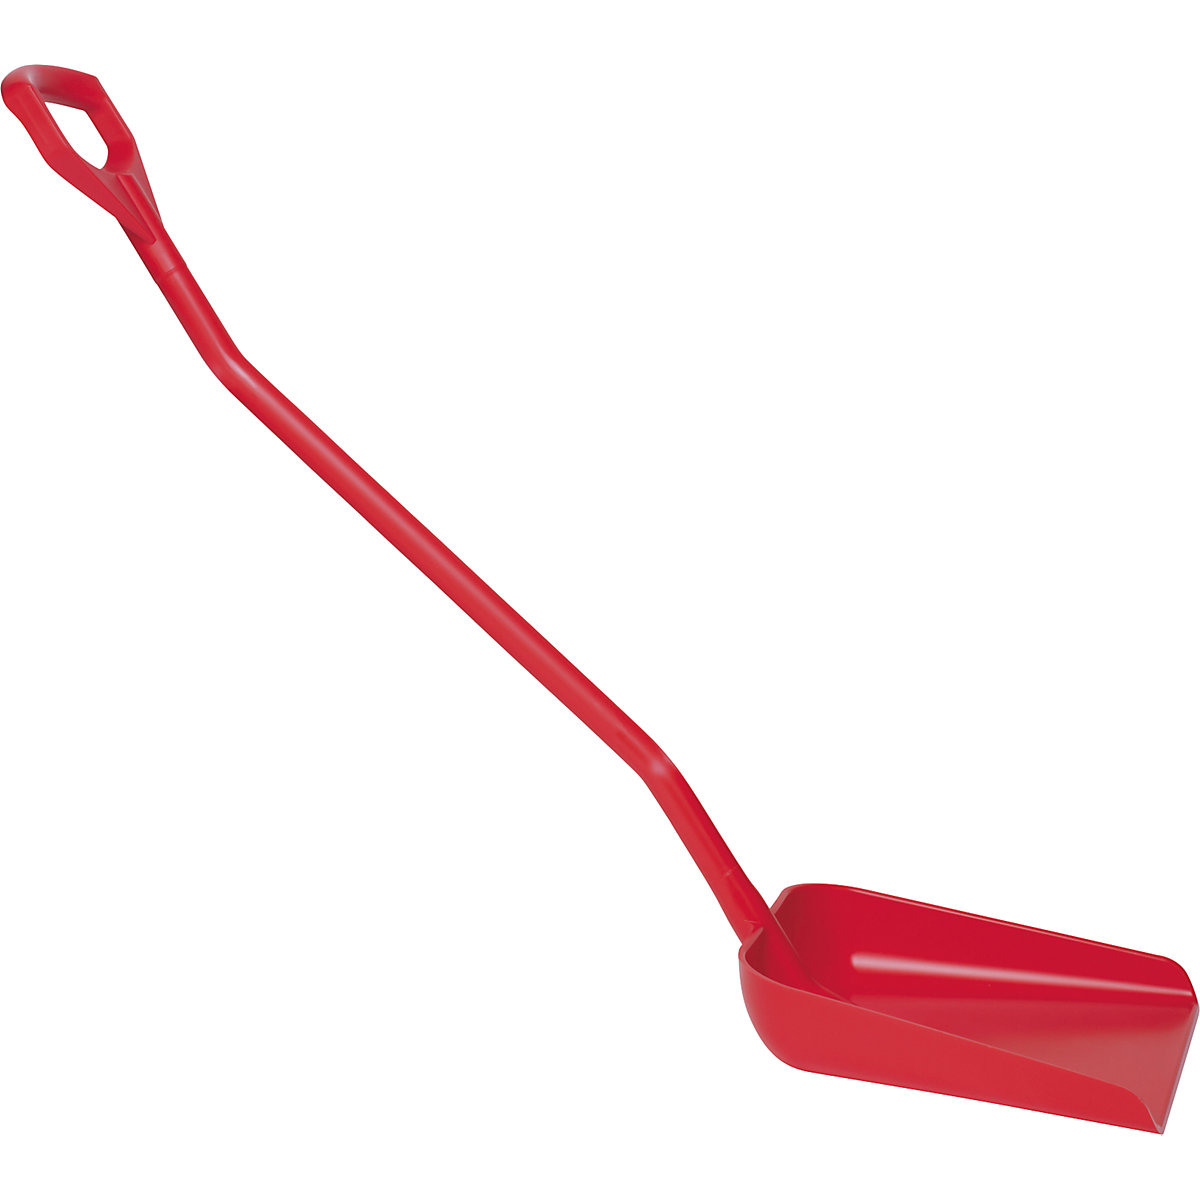 Shovel, ergonomic and suitable for foodstuffs – Vikan, overall length 1310 mm, red